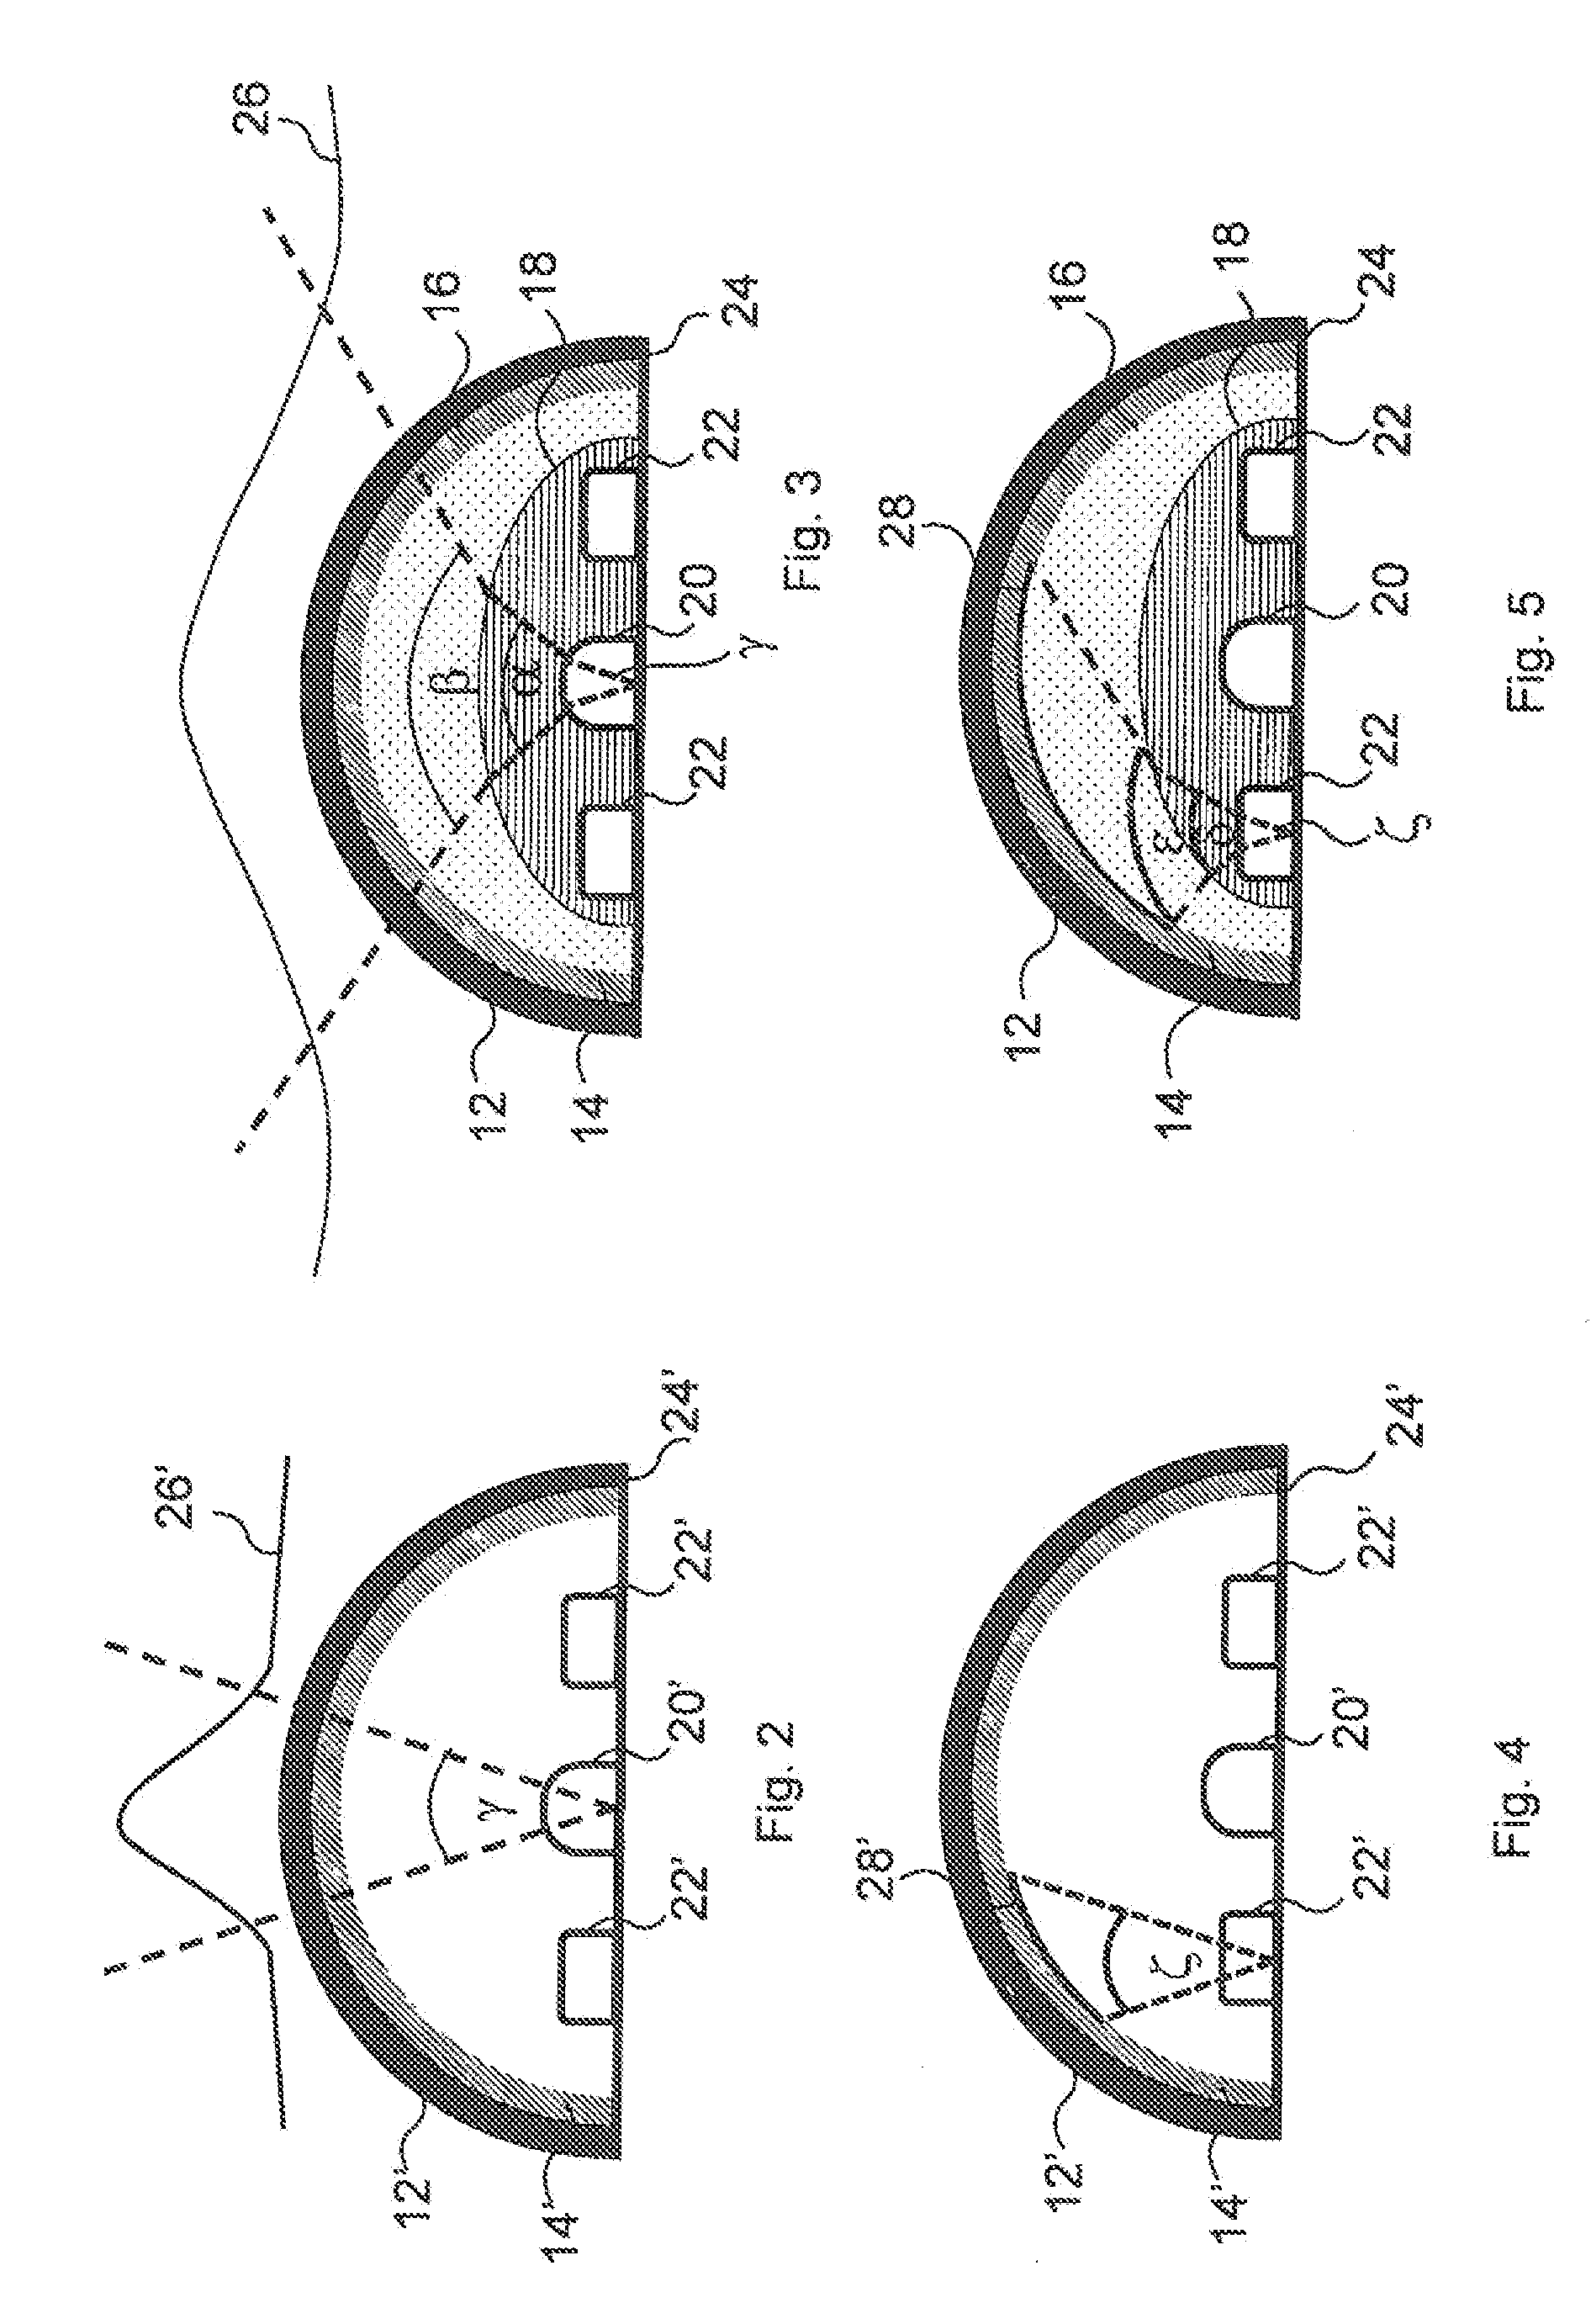 Electrically Insulated Screen and Method of Erecting an Electrically Insulated Screen